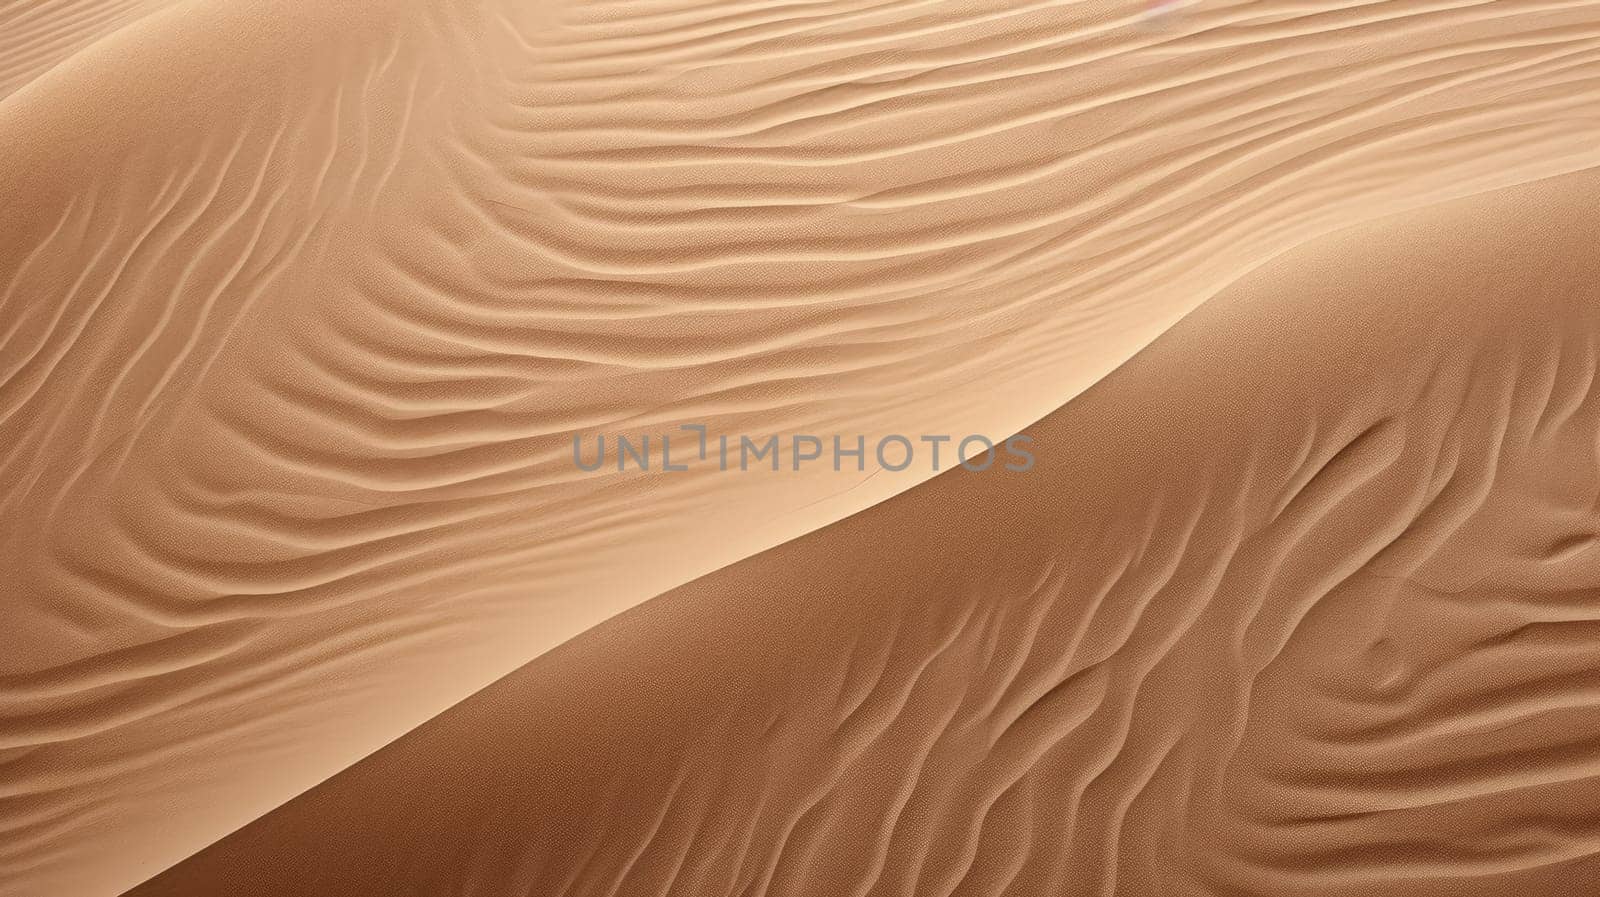 Wavy sand texture background. Desert and dunes. Flat lay. Top view AI